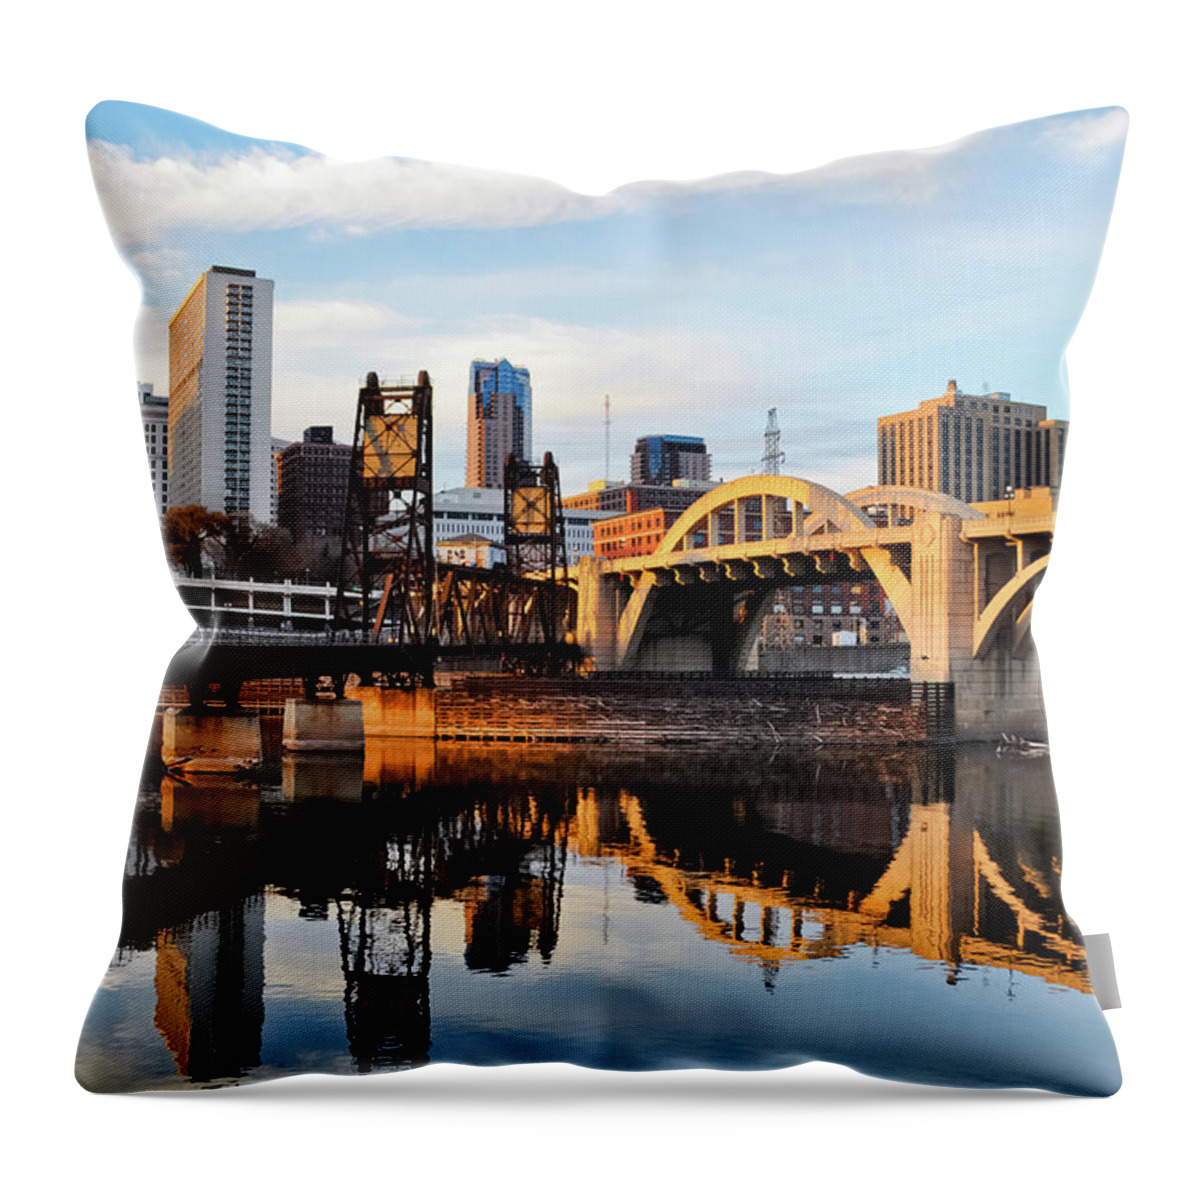 St. Paul Throw Pillow featuring the photograph Saint Paul Mississippi River Sunset by Kyle Hanson